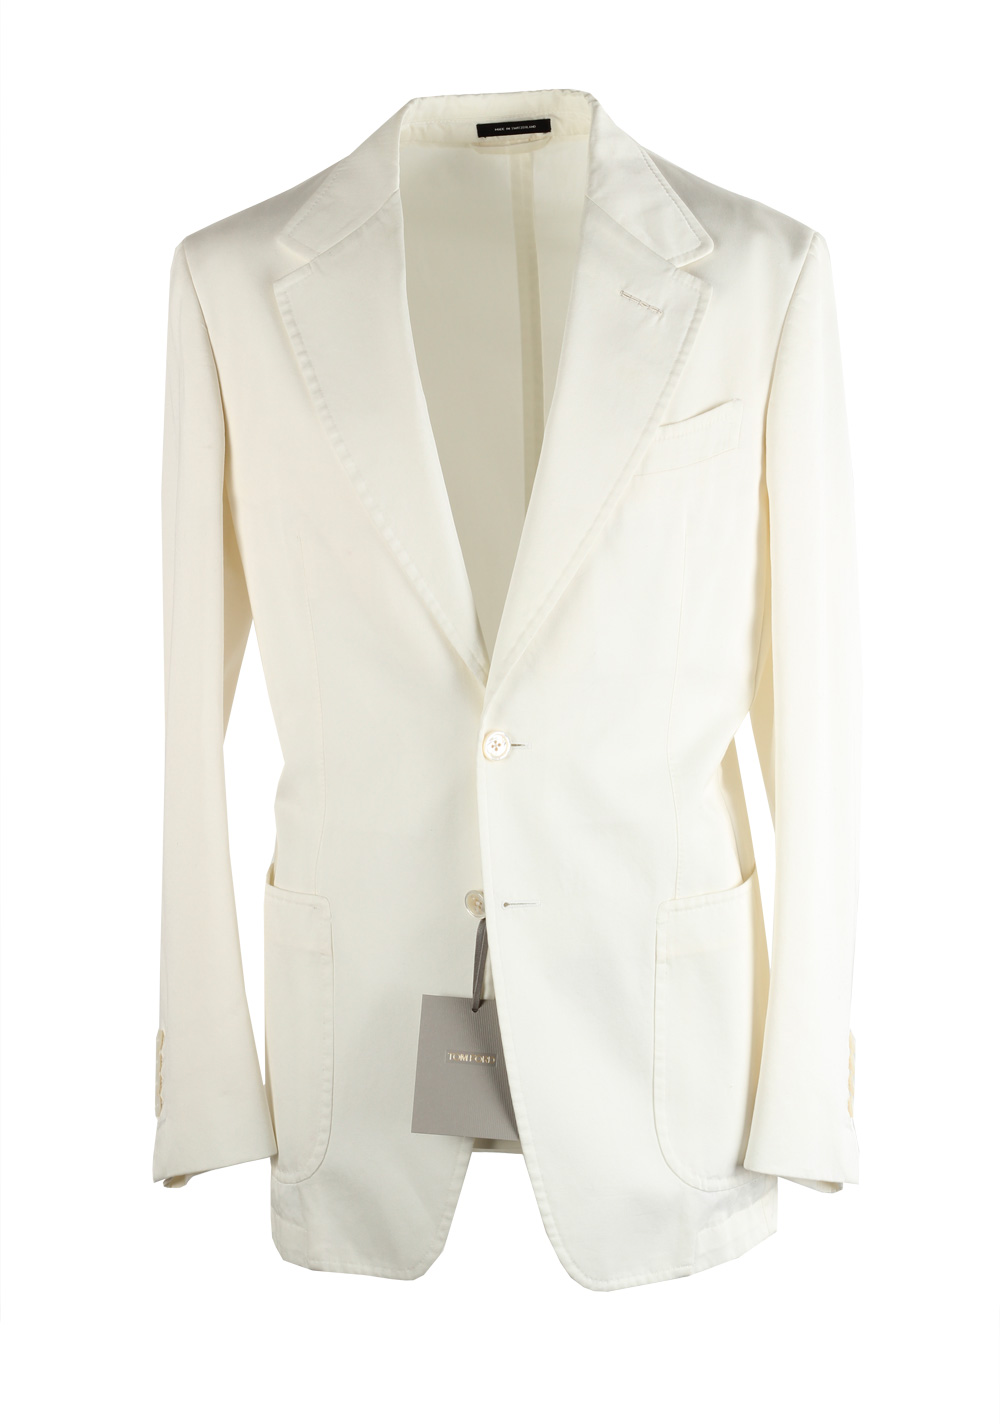 TOM FORD Shelton Off White Sport Coat Size 46 / 36R U.S. In Cotton | Costume Limité